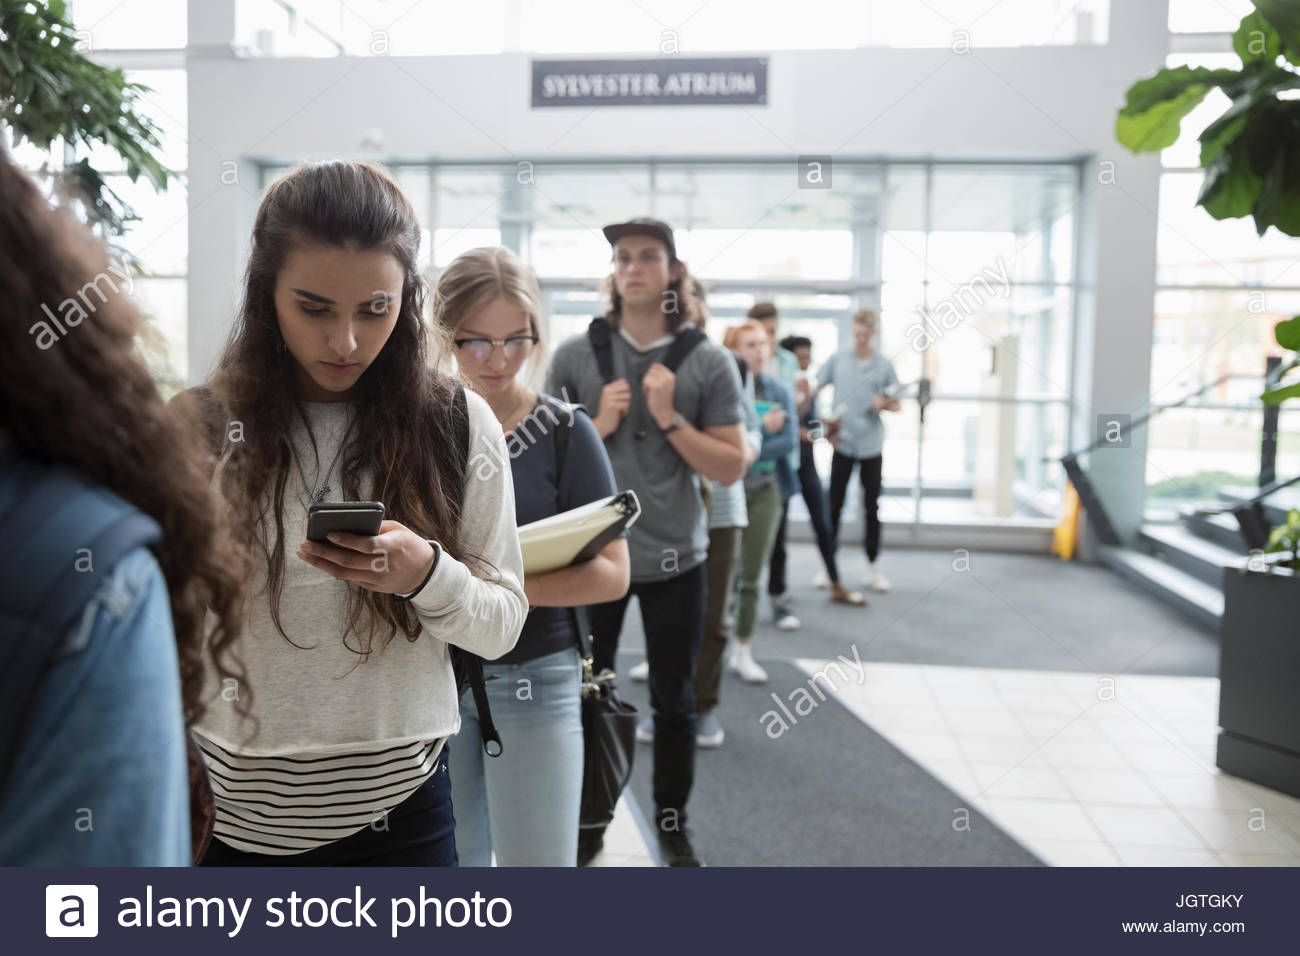 Female college student texting with cell phone in queue Stock Photo